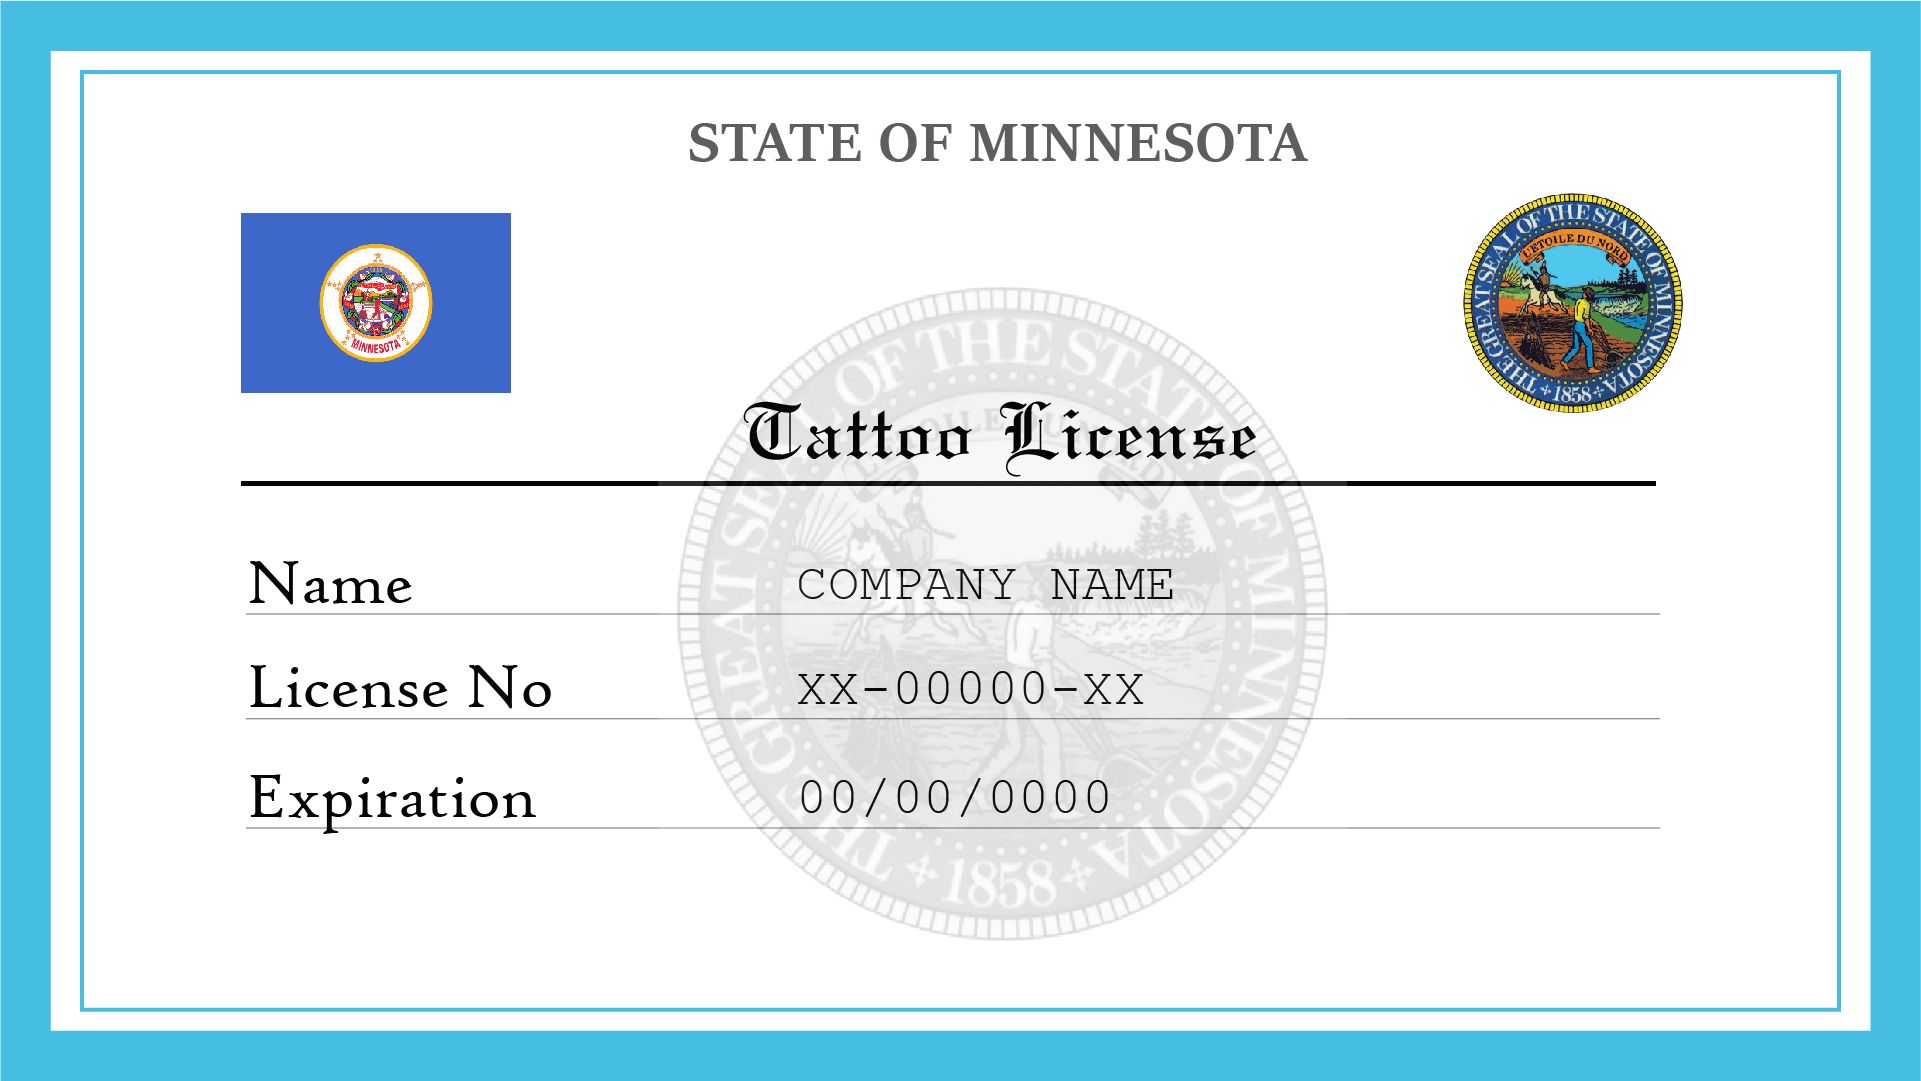 How to get a tattoo license in minnesota